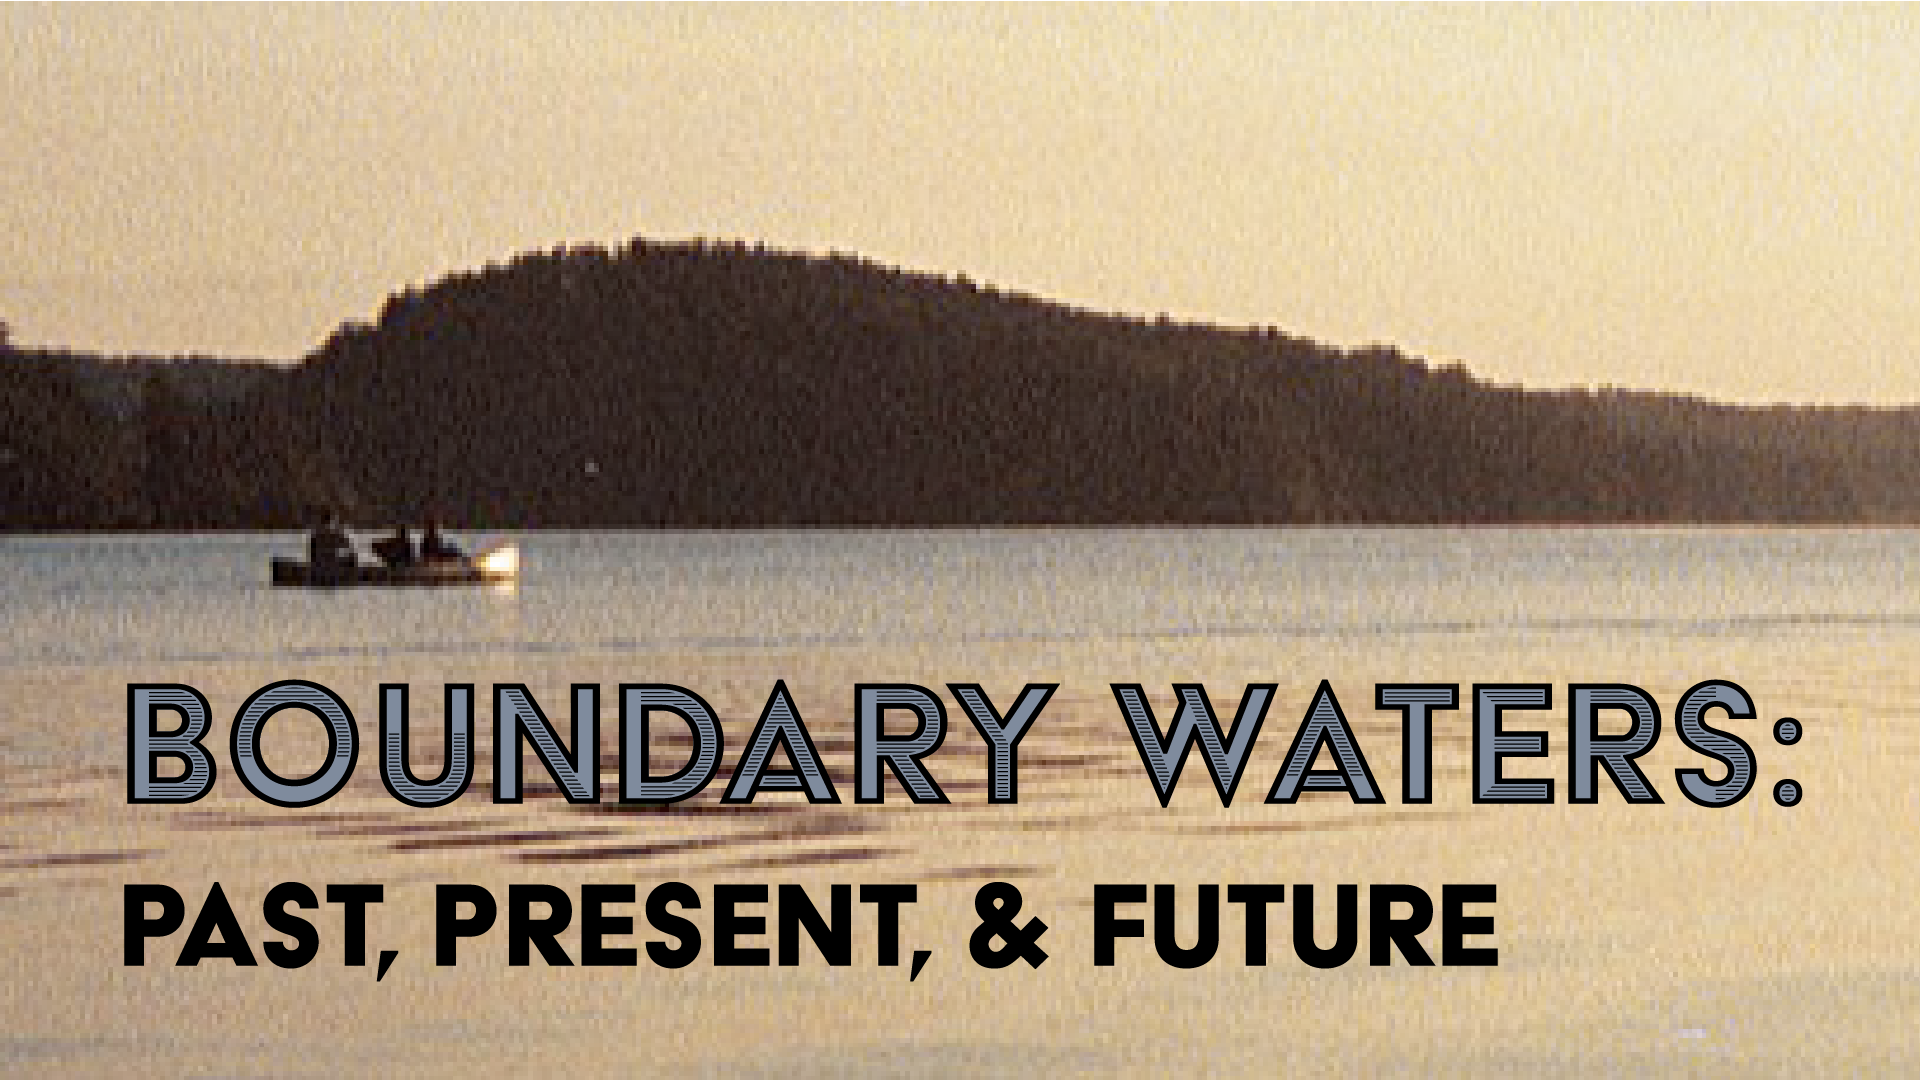 Boundary Waters: Past, Present, & Future